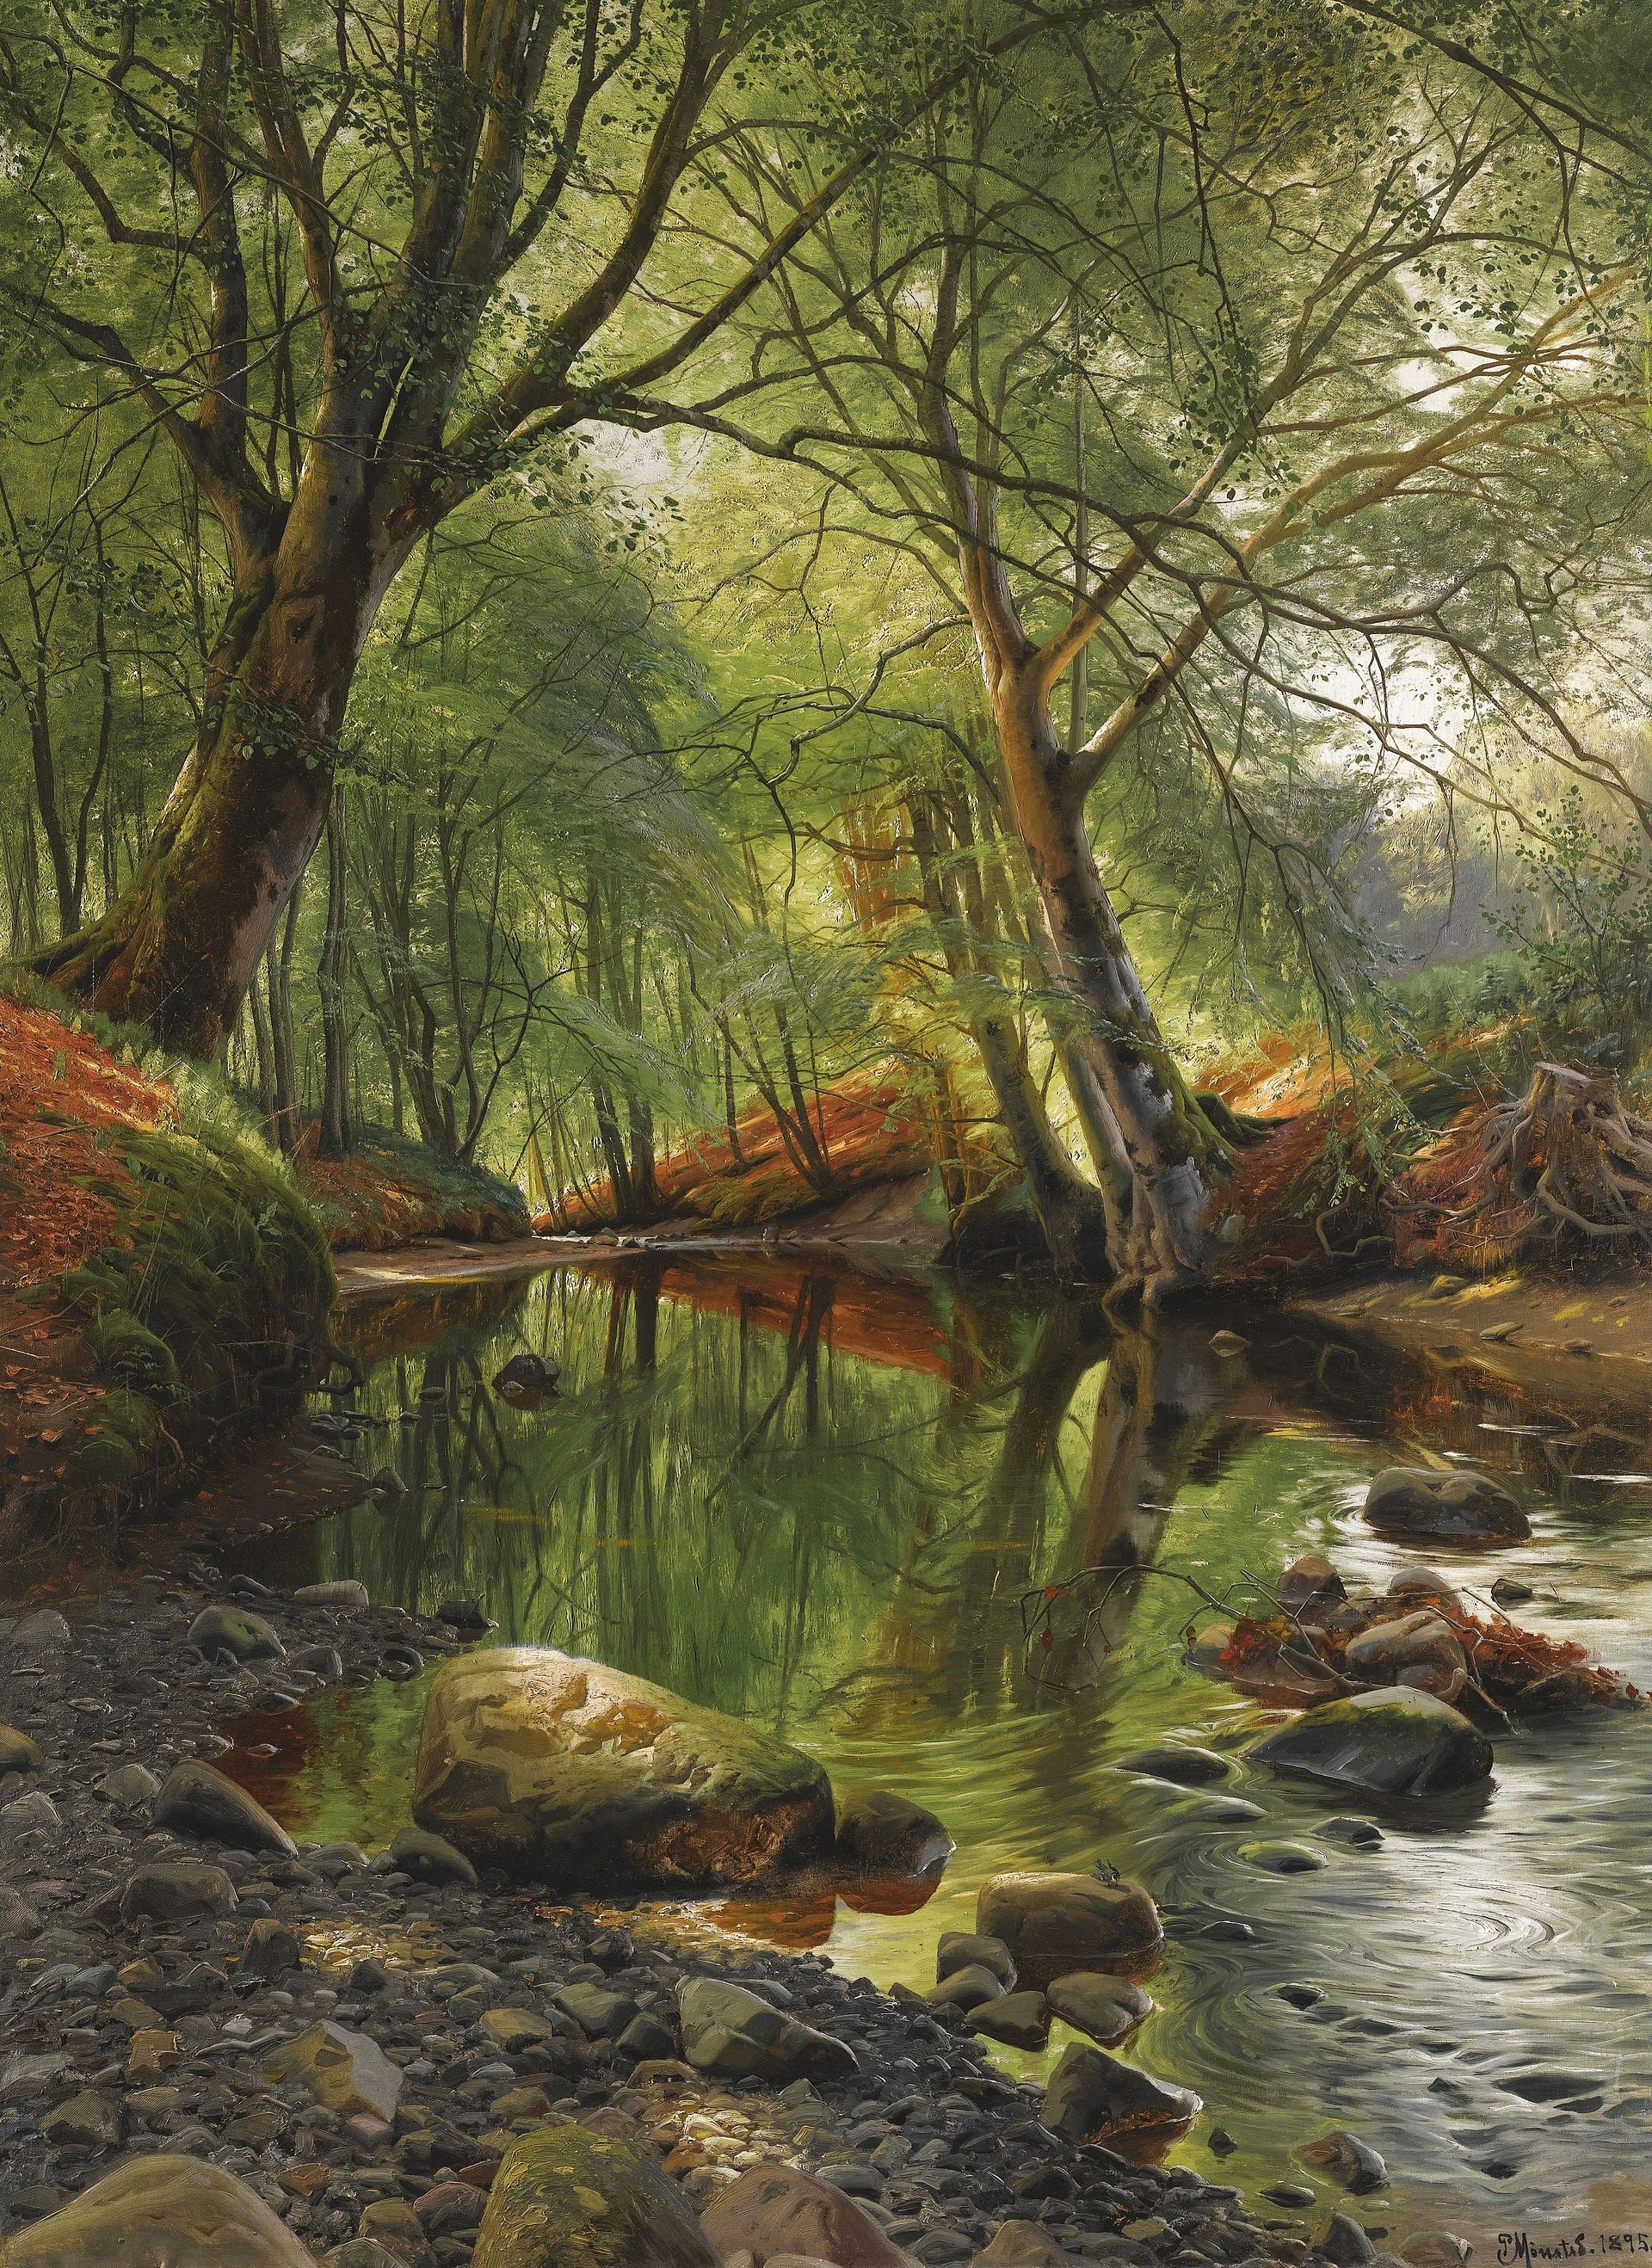 Inspiration: “A Woodland Stream,” By Peder Monsted